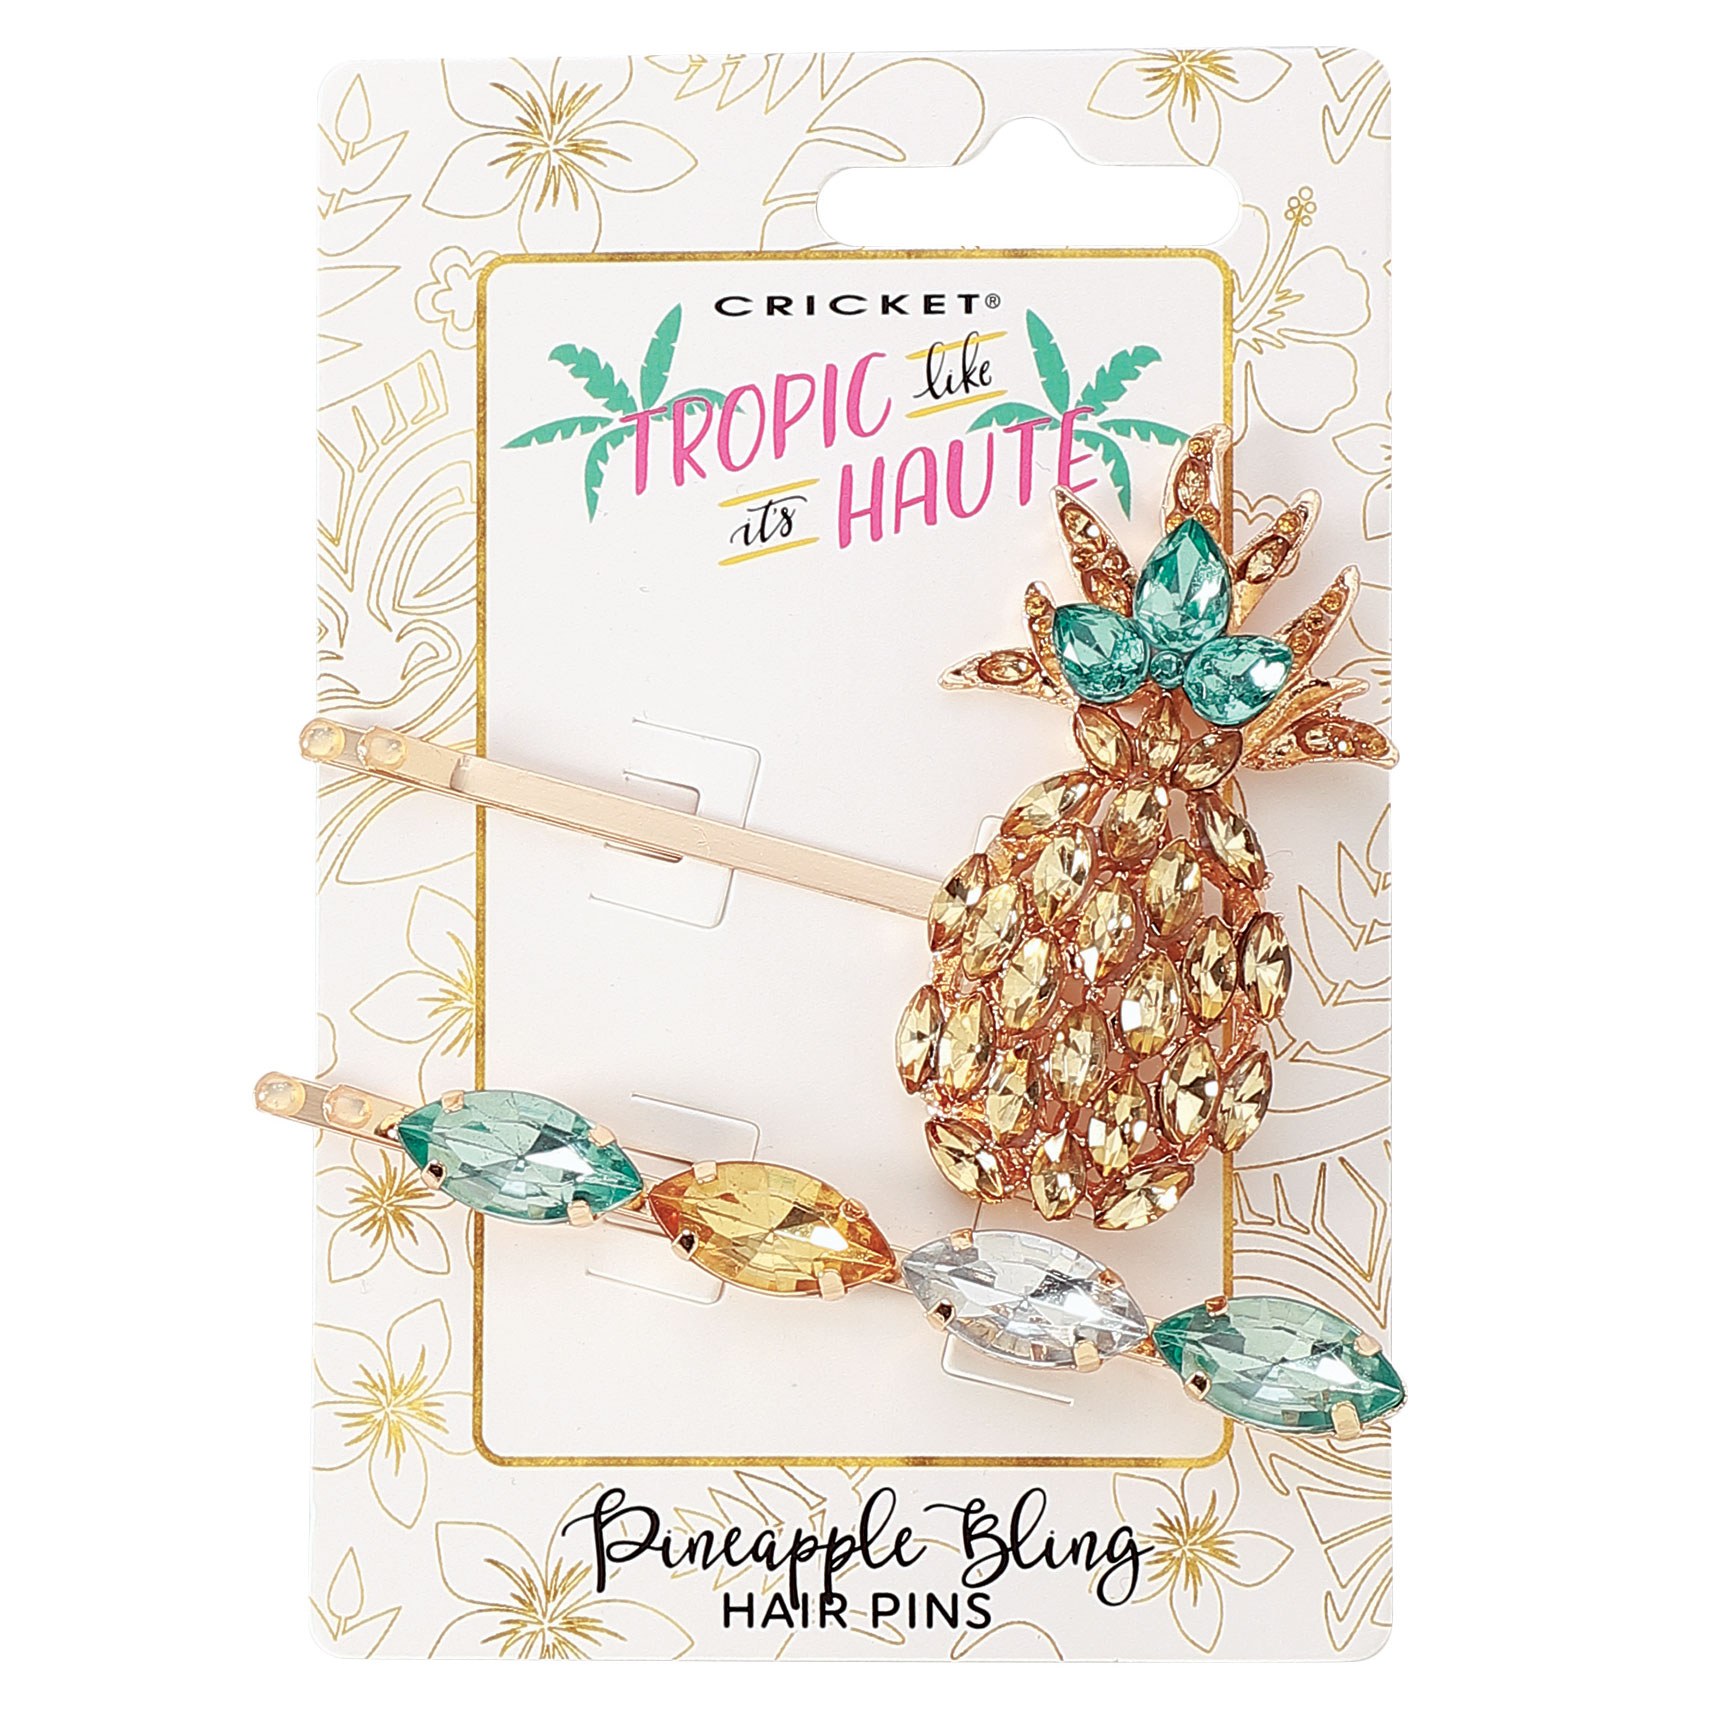 Cricket Tropic Like It's Haute: Pineapple Bling Hair Pins in Gold